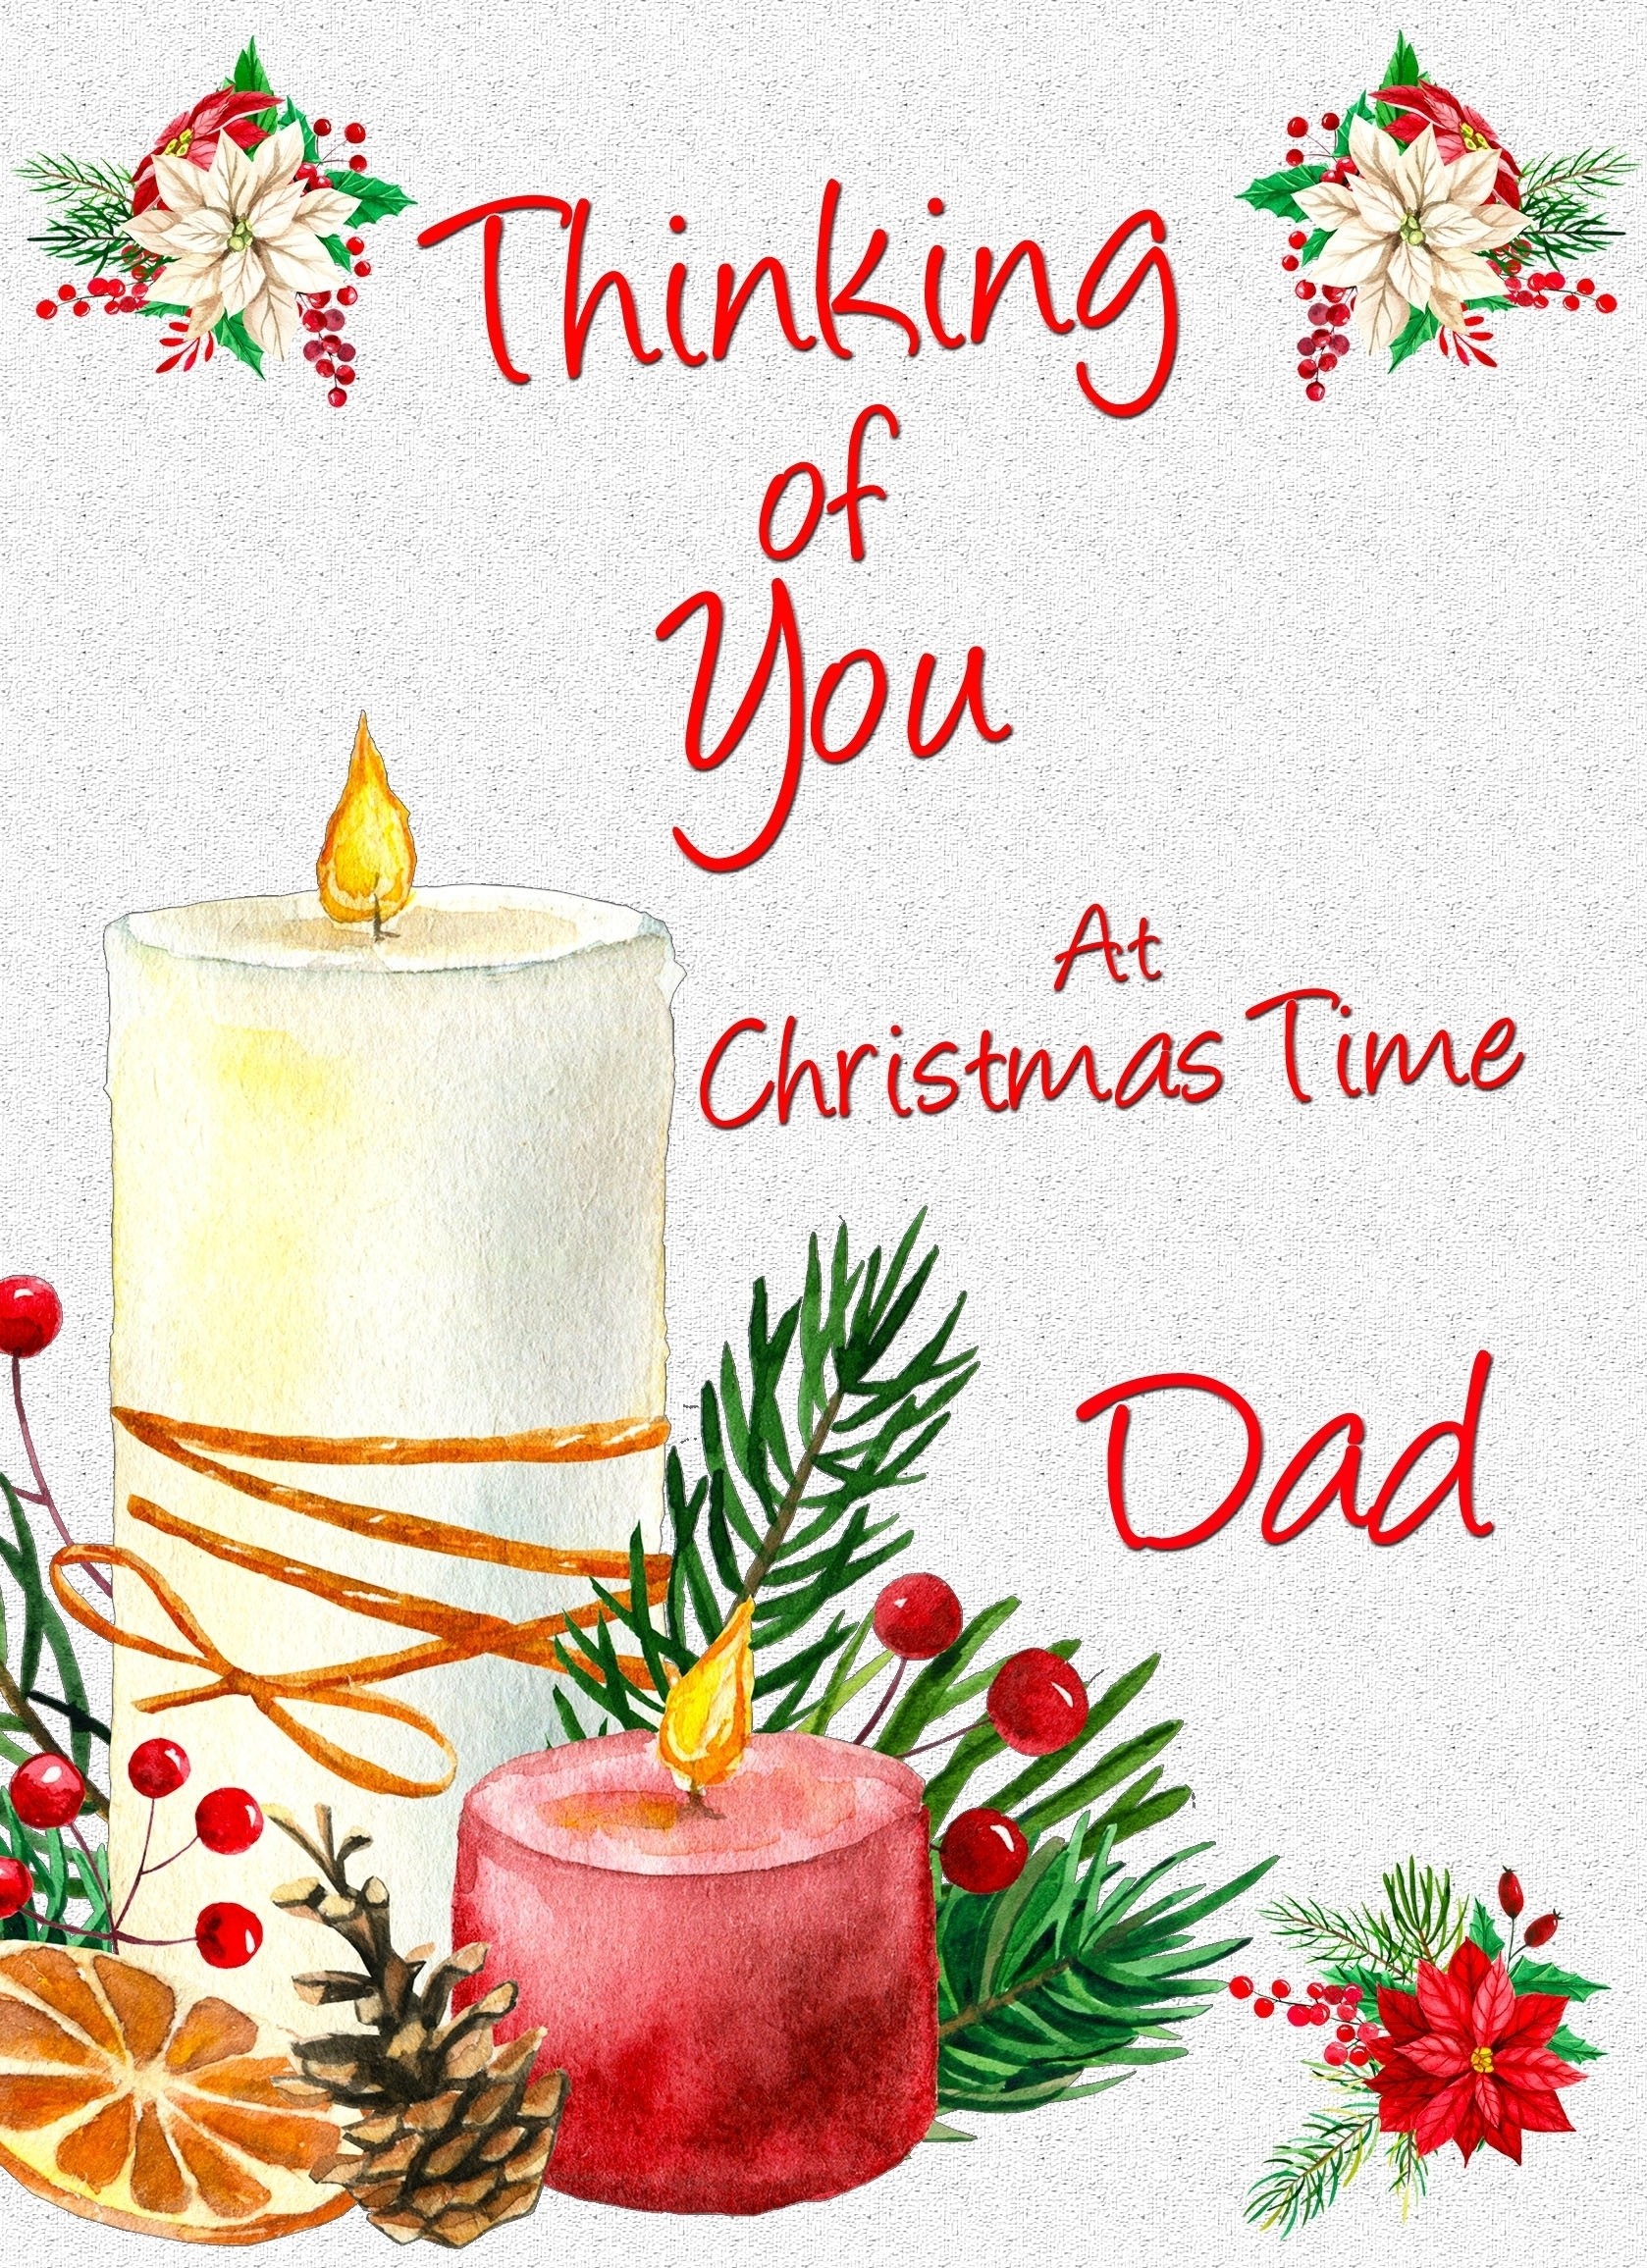 Thinking of You at Christmas Card For Dad (Candle)